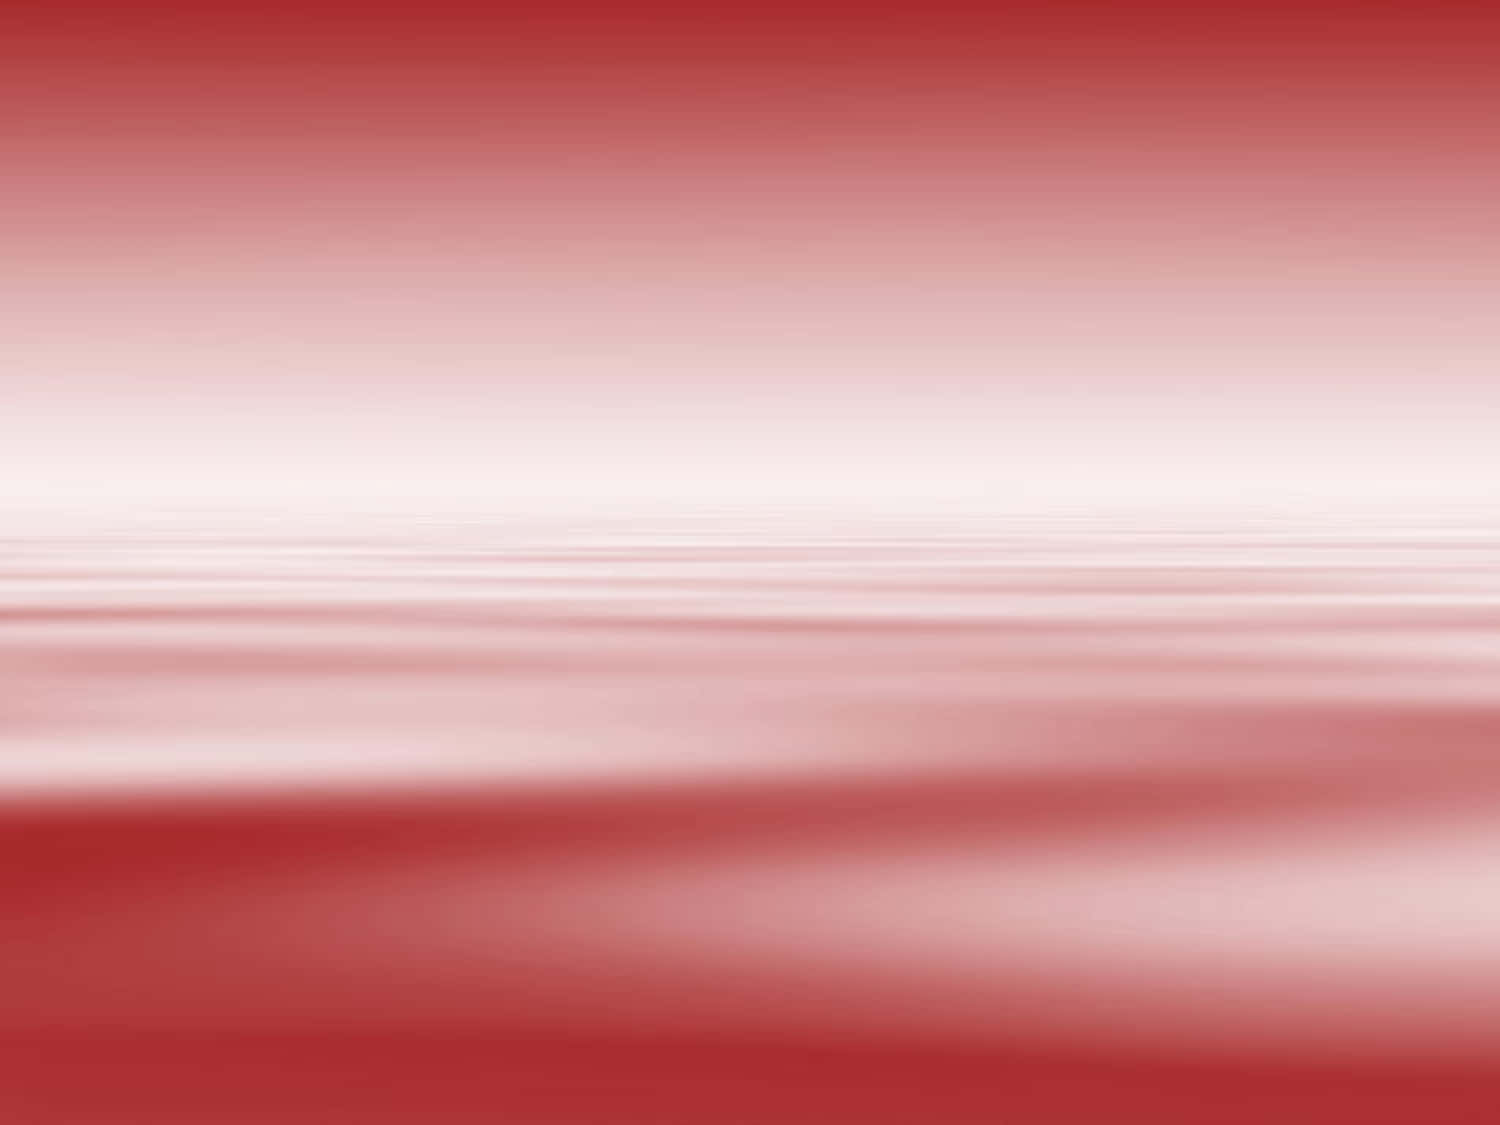 A Red Abstract Background With A Rippled Surface